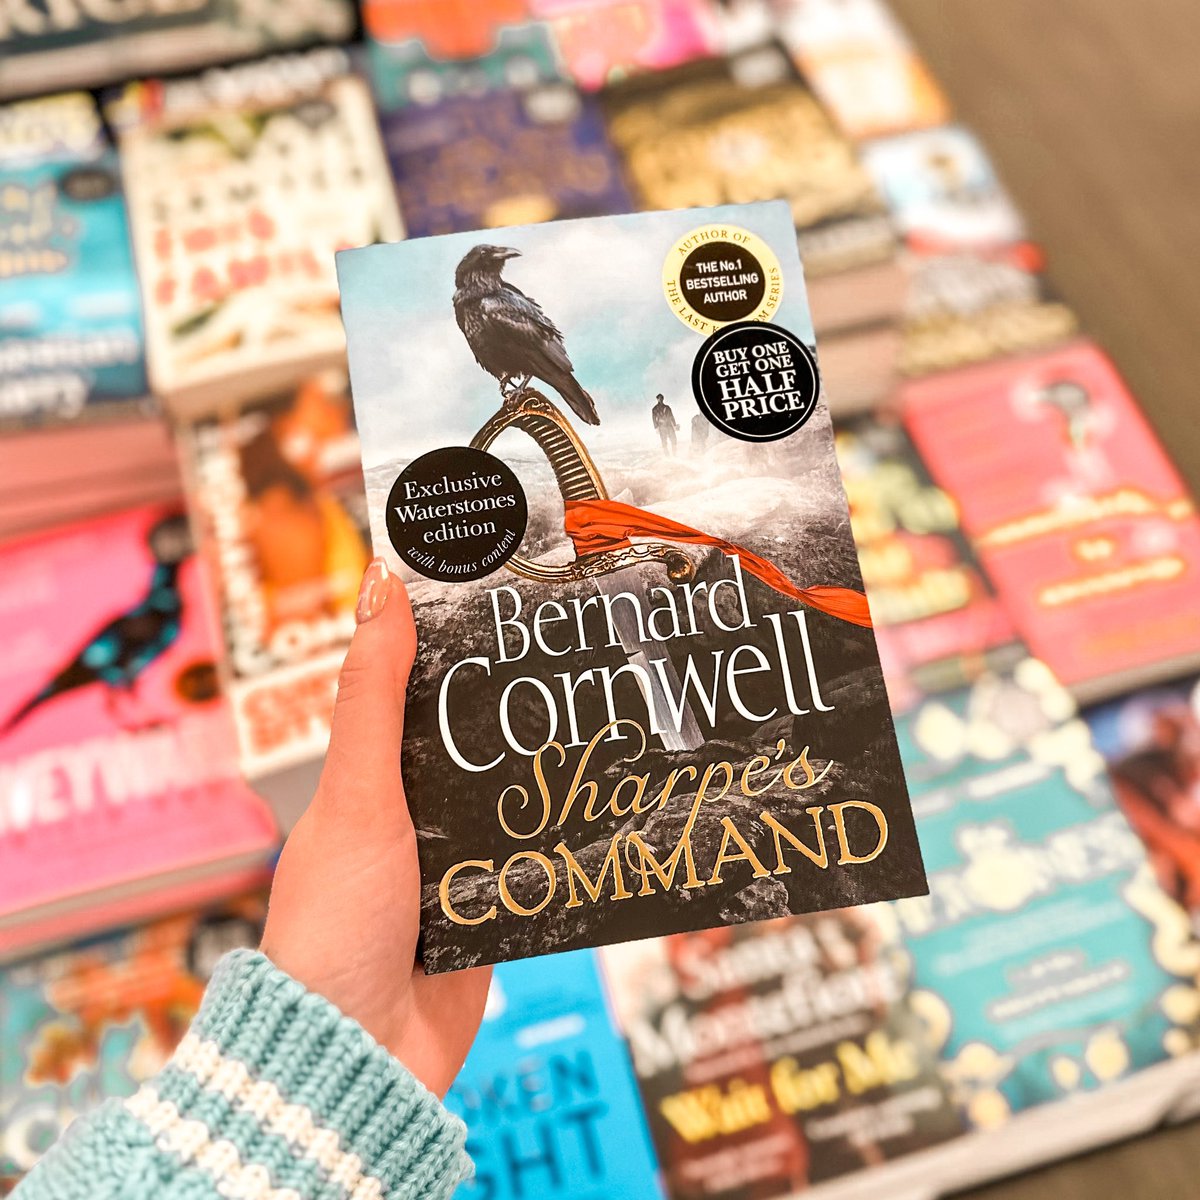 Bernard Cornwell’s Sharpe’s Command is out now on paperback, and our Exclusive Waterstones edition features bonus content you won’t find anywhere else!

#waterstonesnorthallerton #northallerton #bookshop #lovenorthallerton #waterstones #bernardcornwell #sharpe #sharpescommand